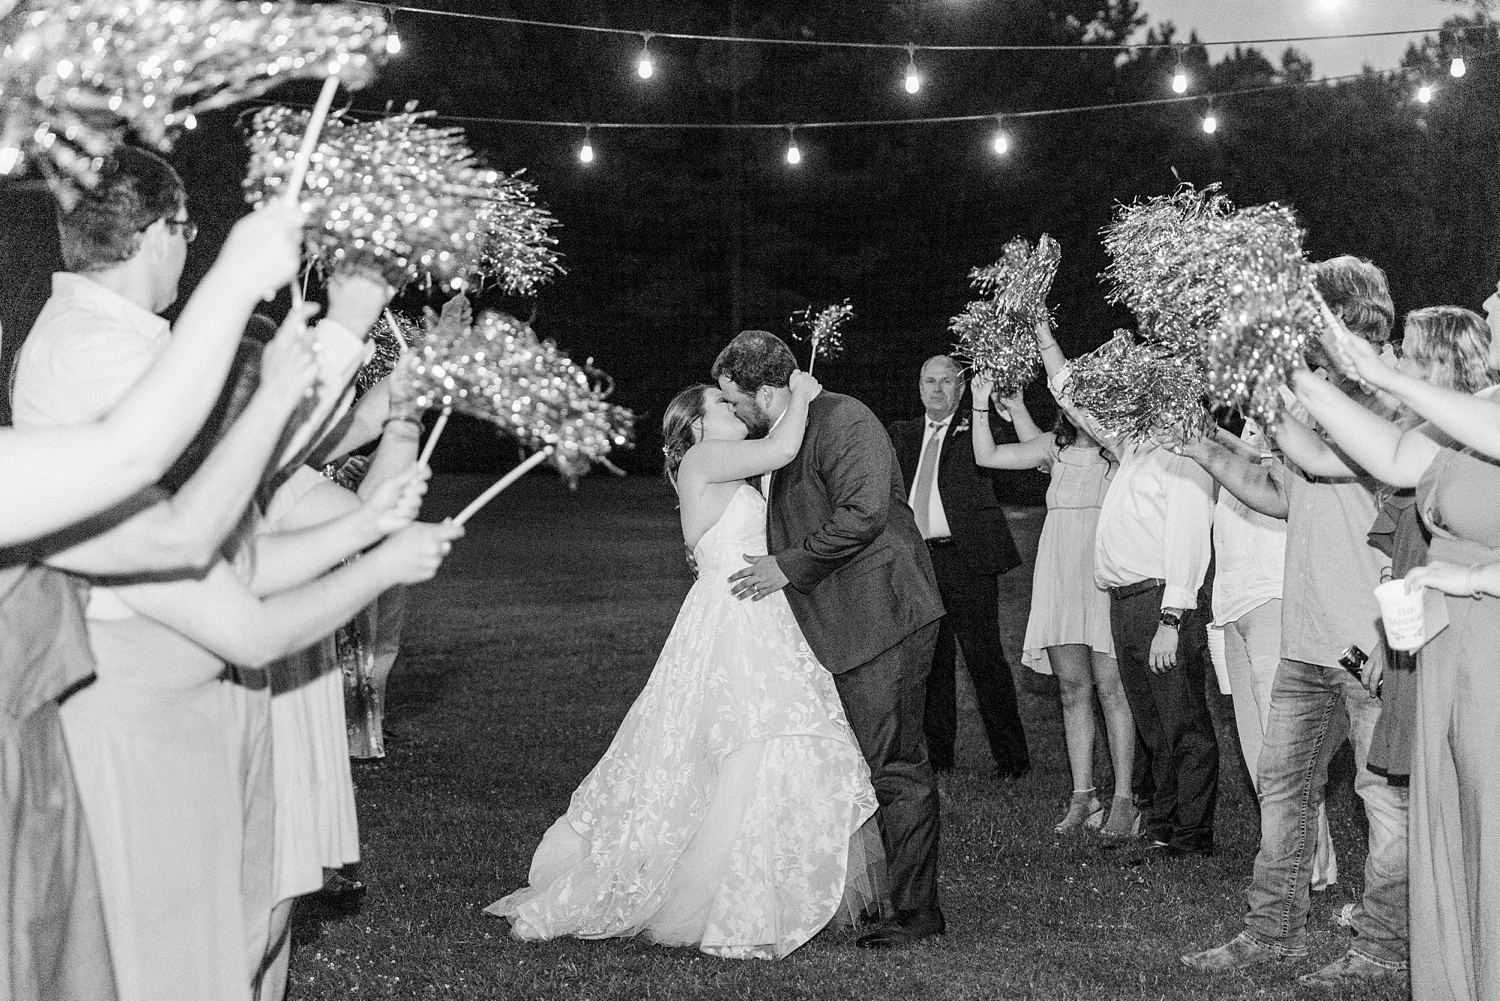 newlyweds leave wedding reception during pom-pom exit at night